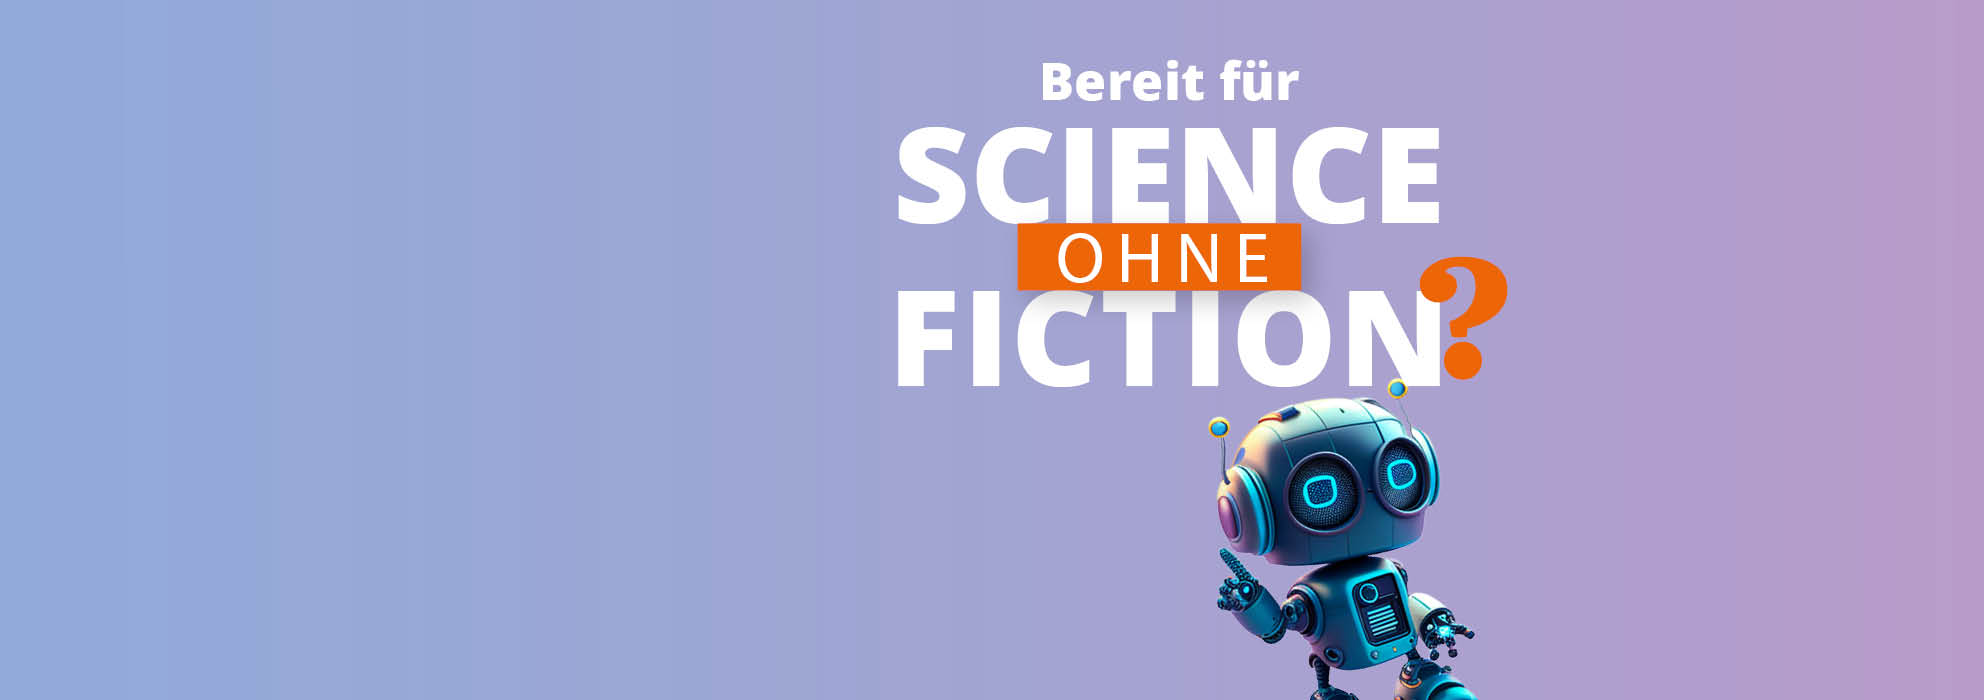 Science ohne Fiction